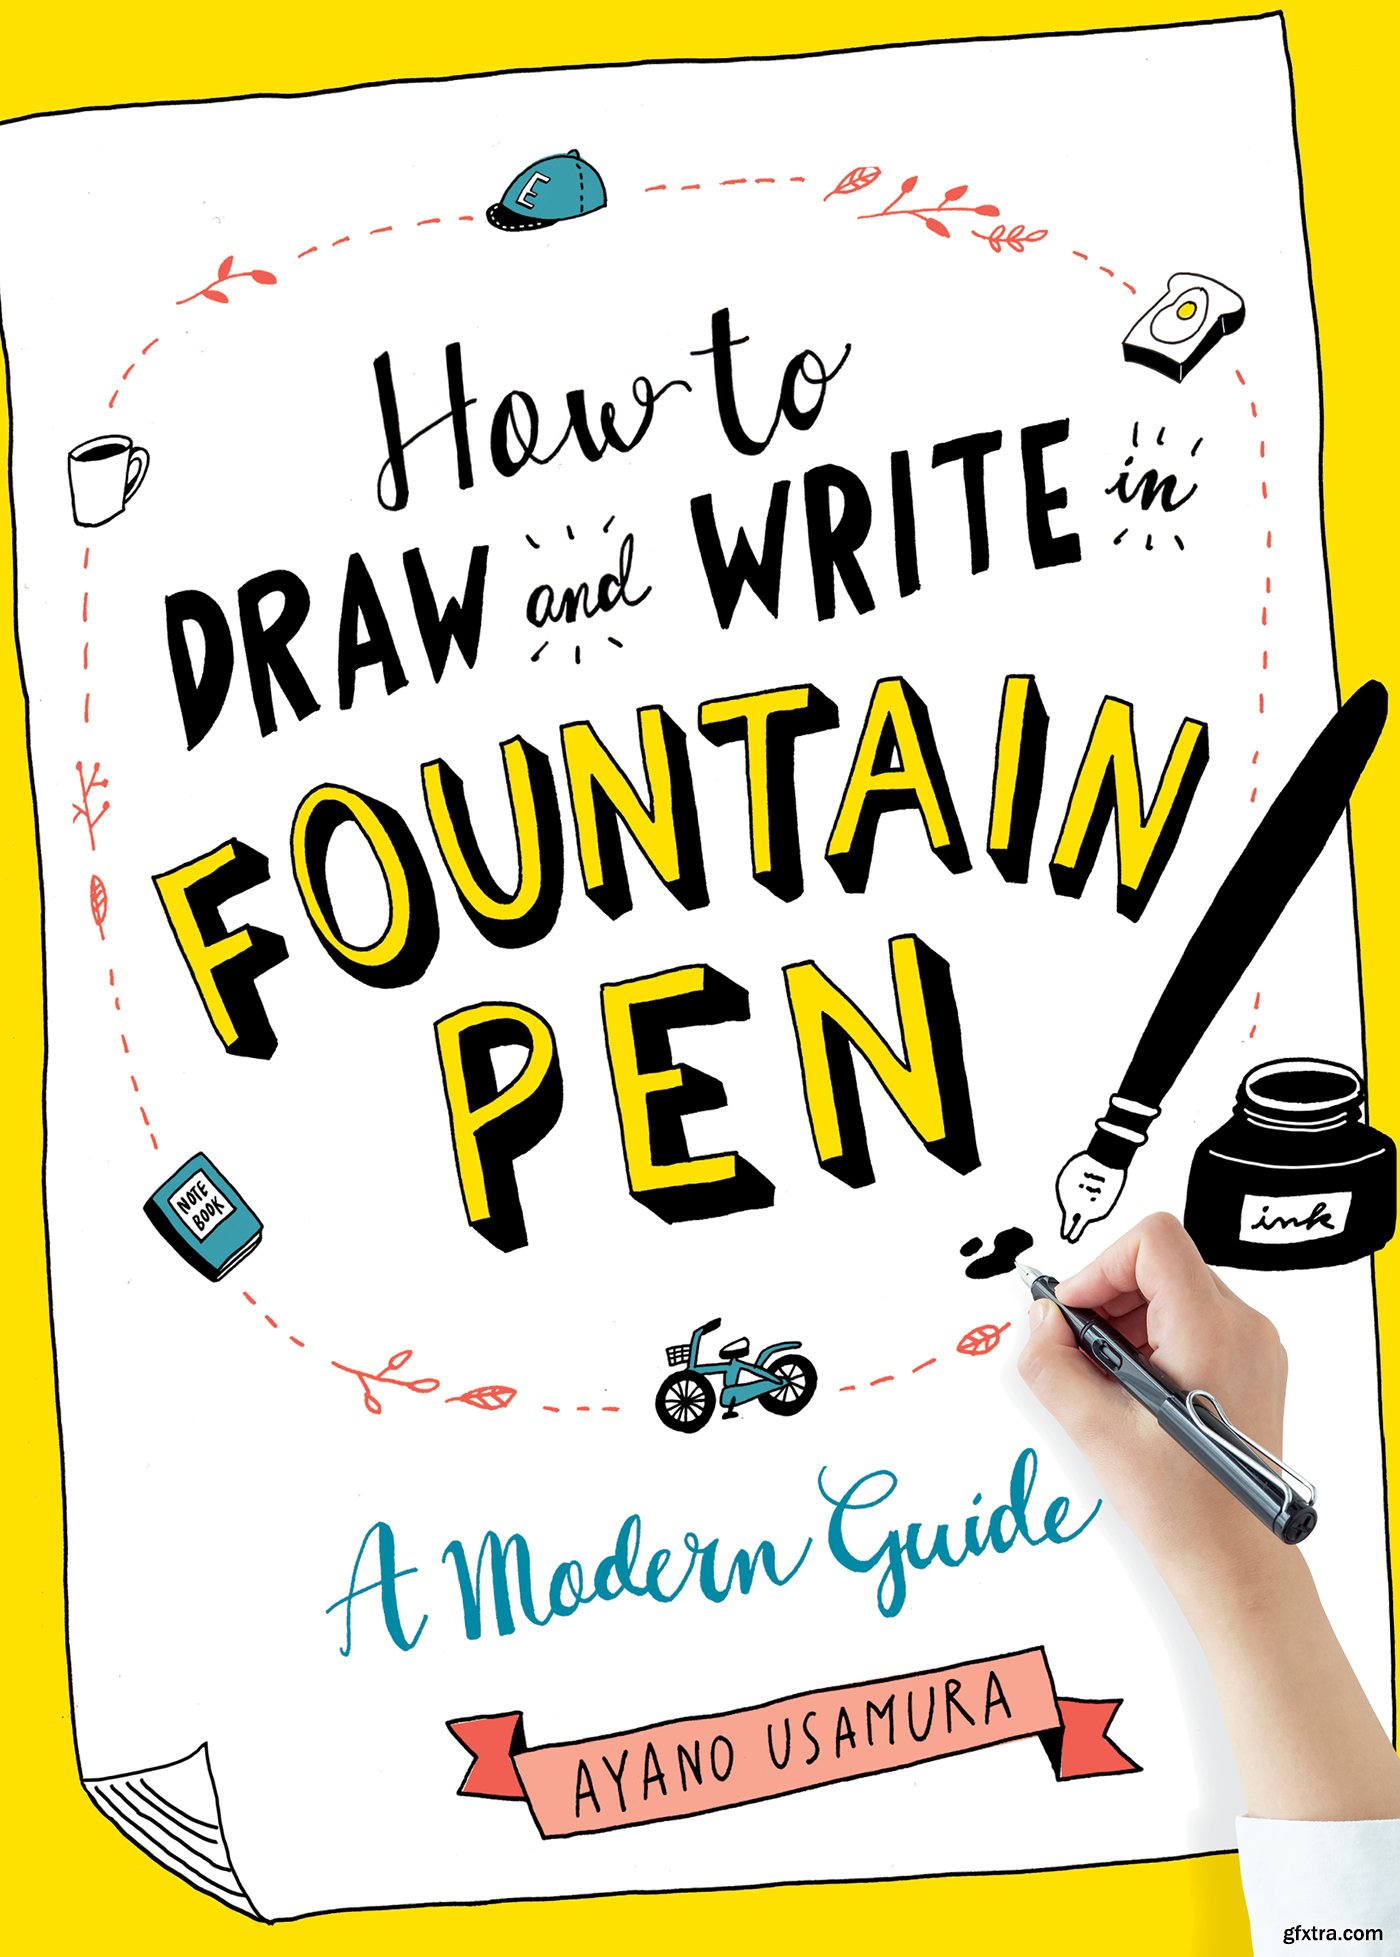 How to Draw and Write in Fountain Pen A Modern Guide by Ayano Usamura